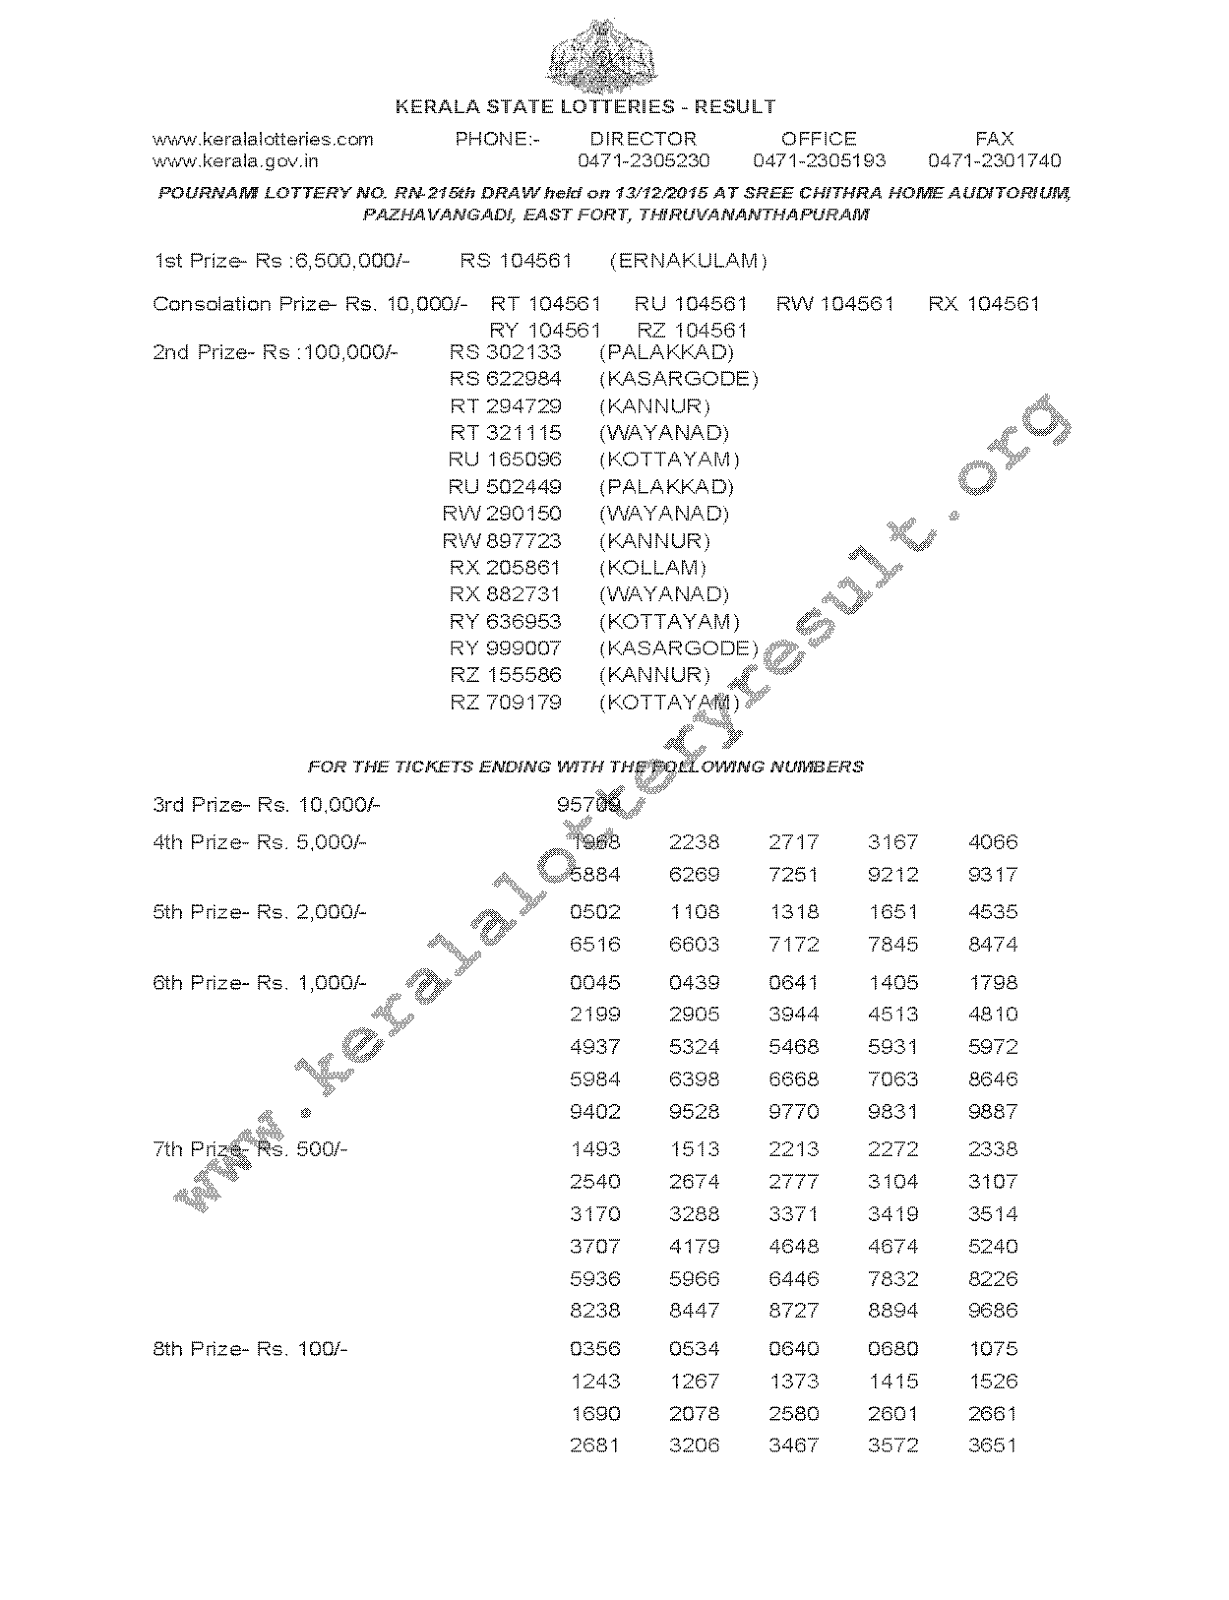 POURNAMI Lottery RN 215 Result 13-12-2015